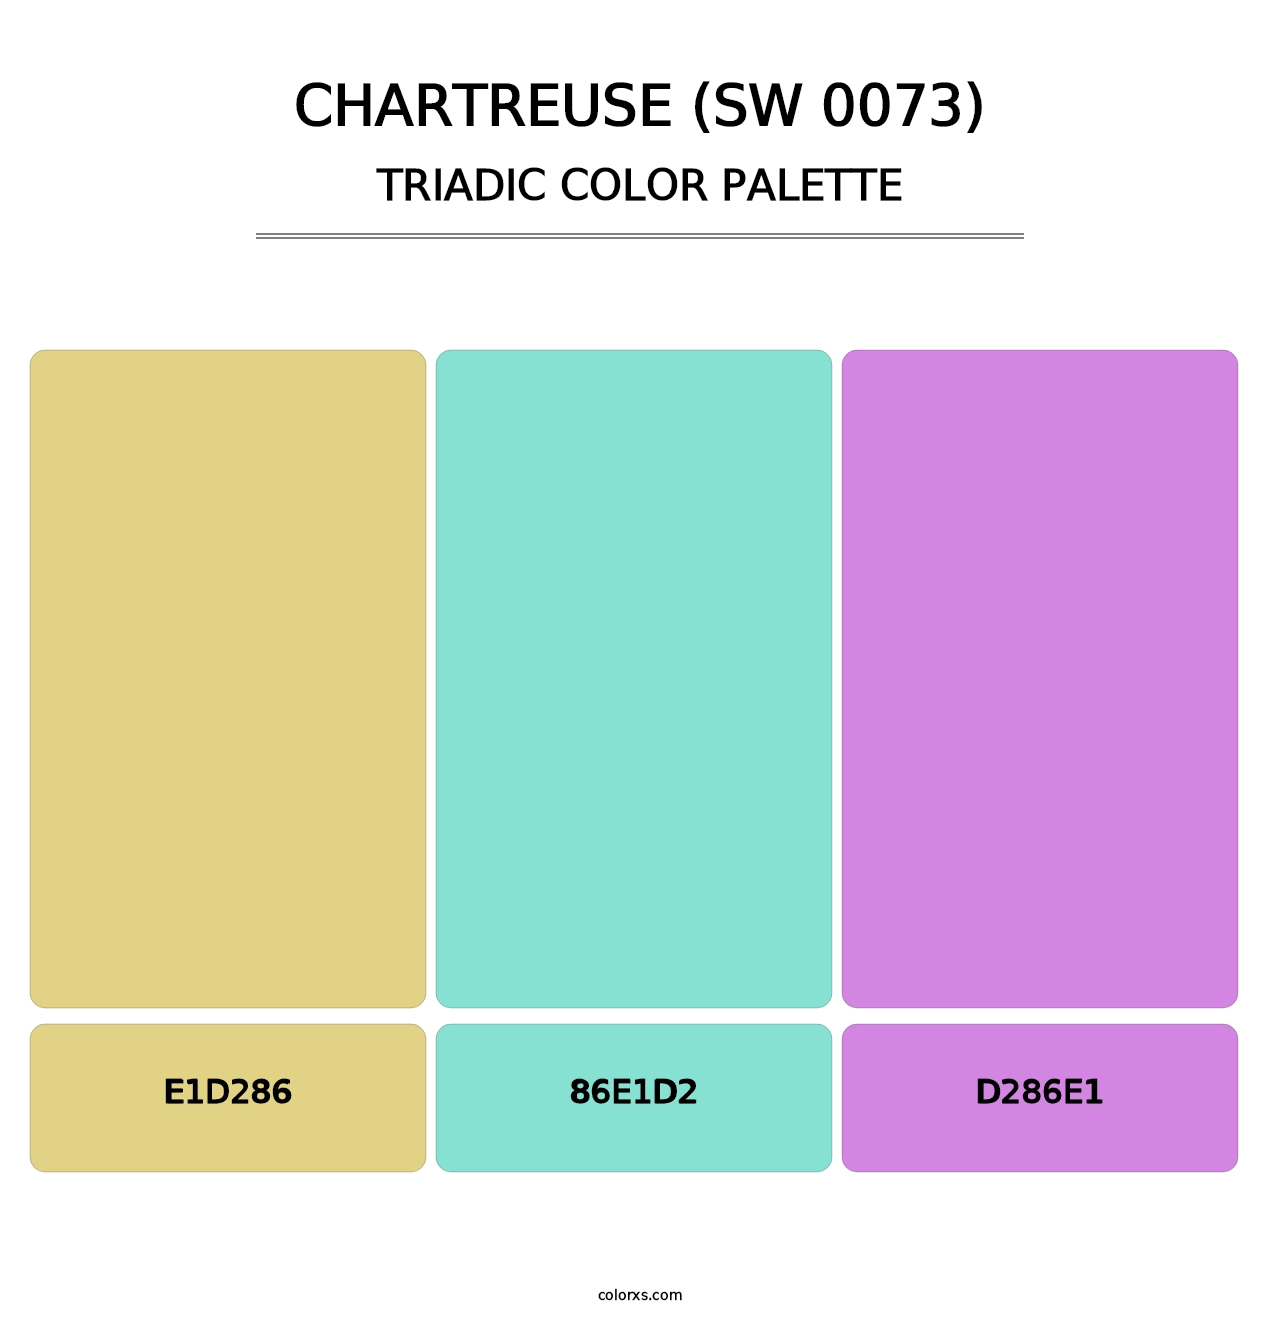 Chartreuse (SW 0073) - Triadic Color Palette